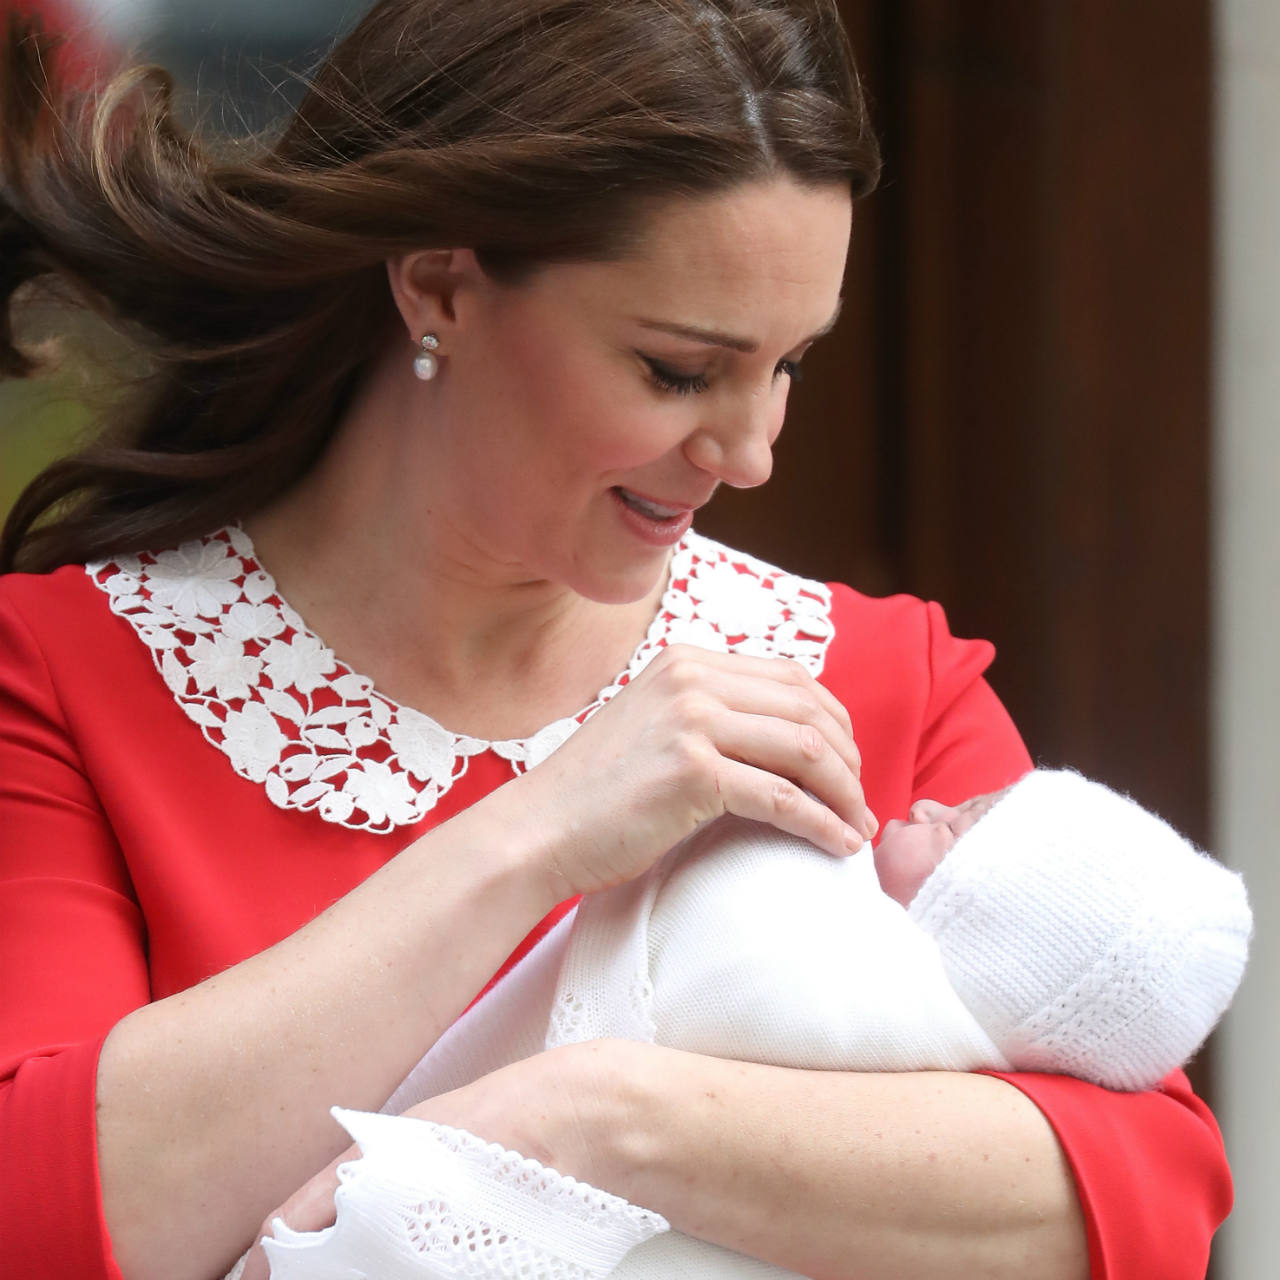 Kate looks down at the royal baby